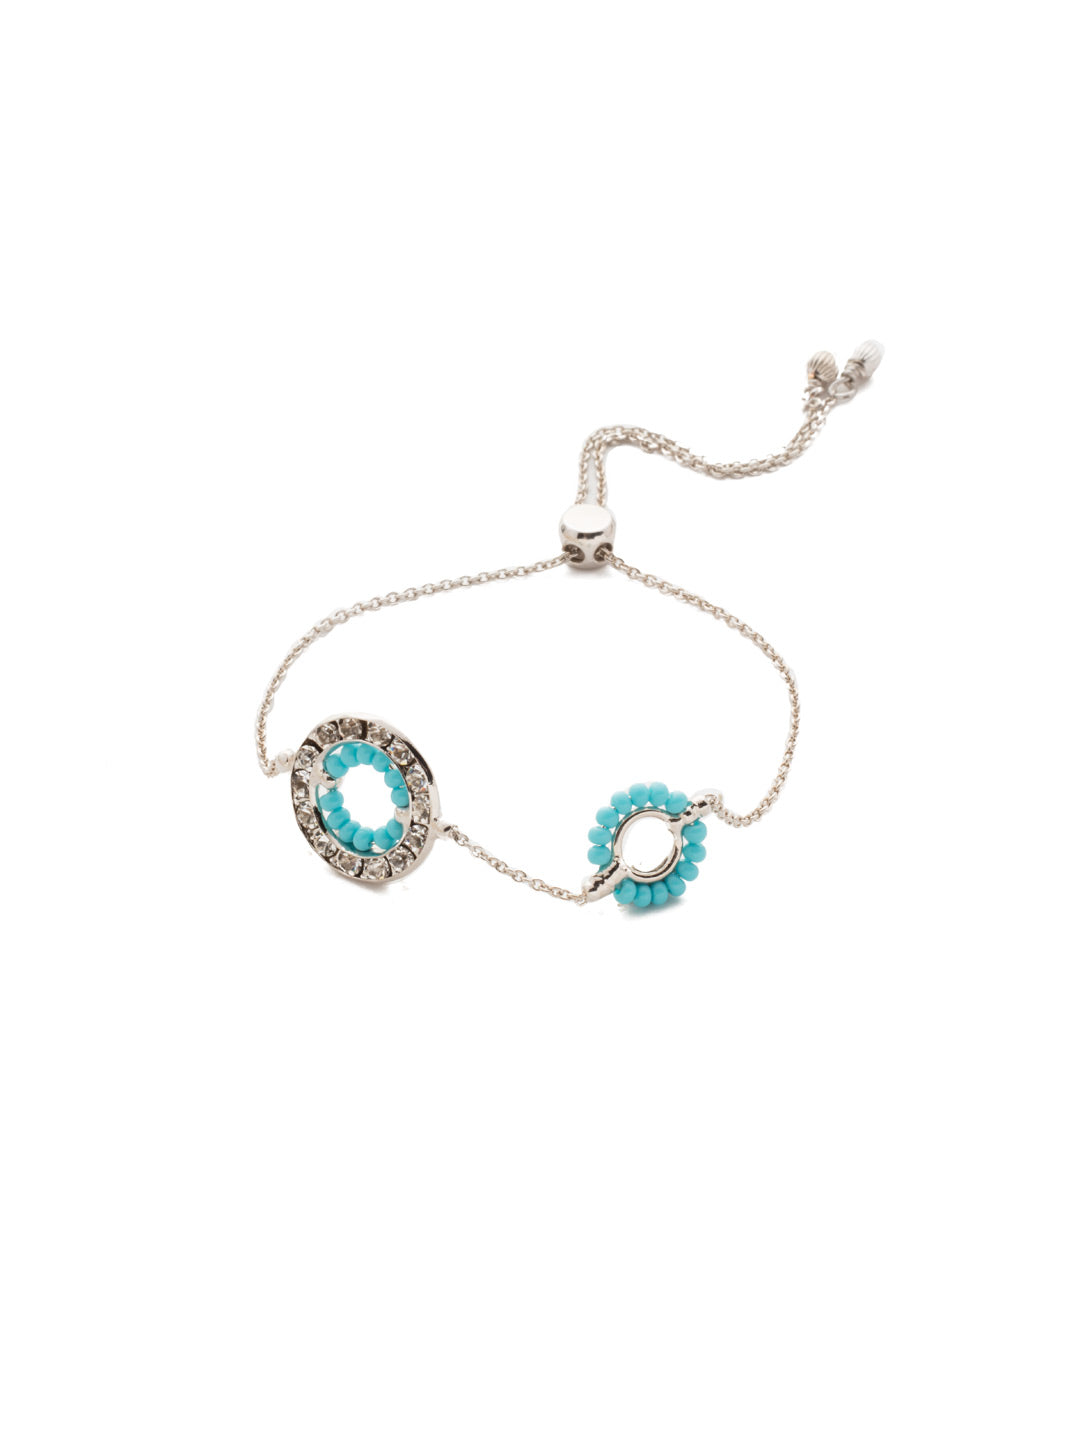 Fire & Ice Slider Bracelet - BEH4RHTHT - <p>Slip on and adjust this stylish bead and crystal combo and you'll immediately feel like you've been transported to a special getaway spot. From Sorrelli's Tahitian Treat collection in our Palladium Silver-tone finish.</p>